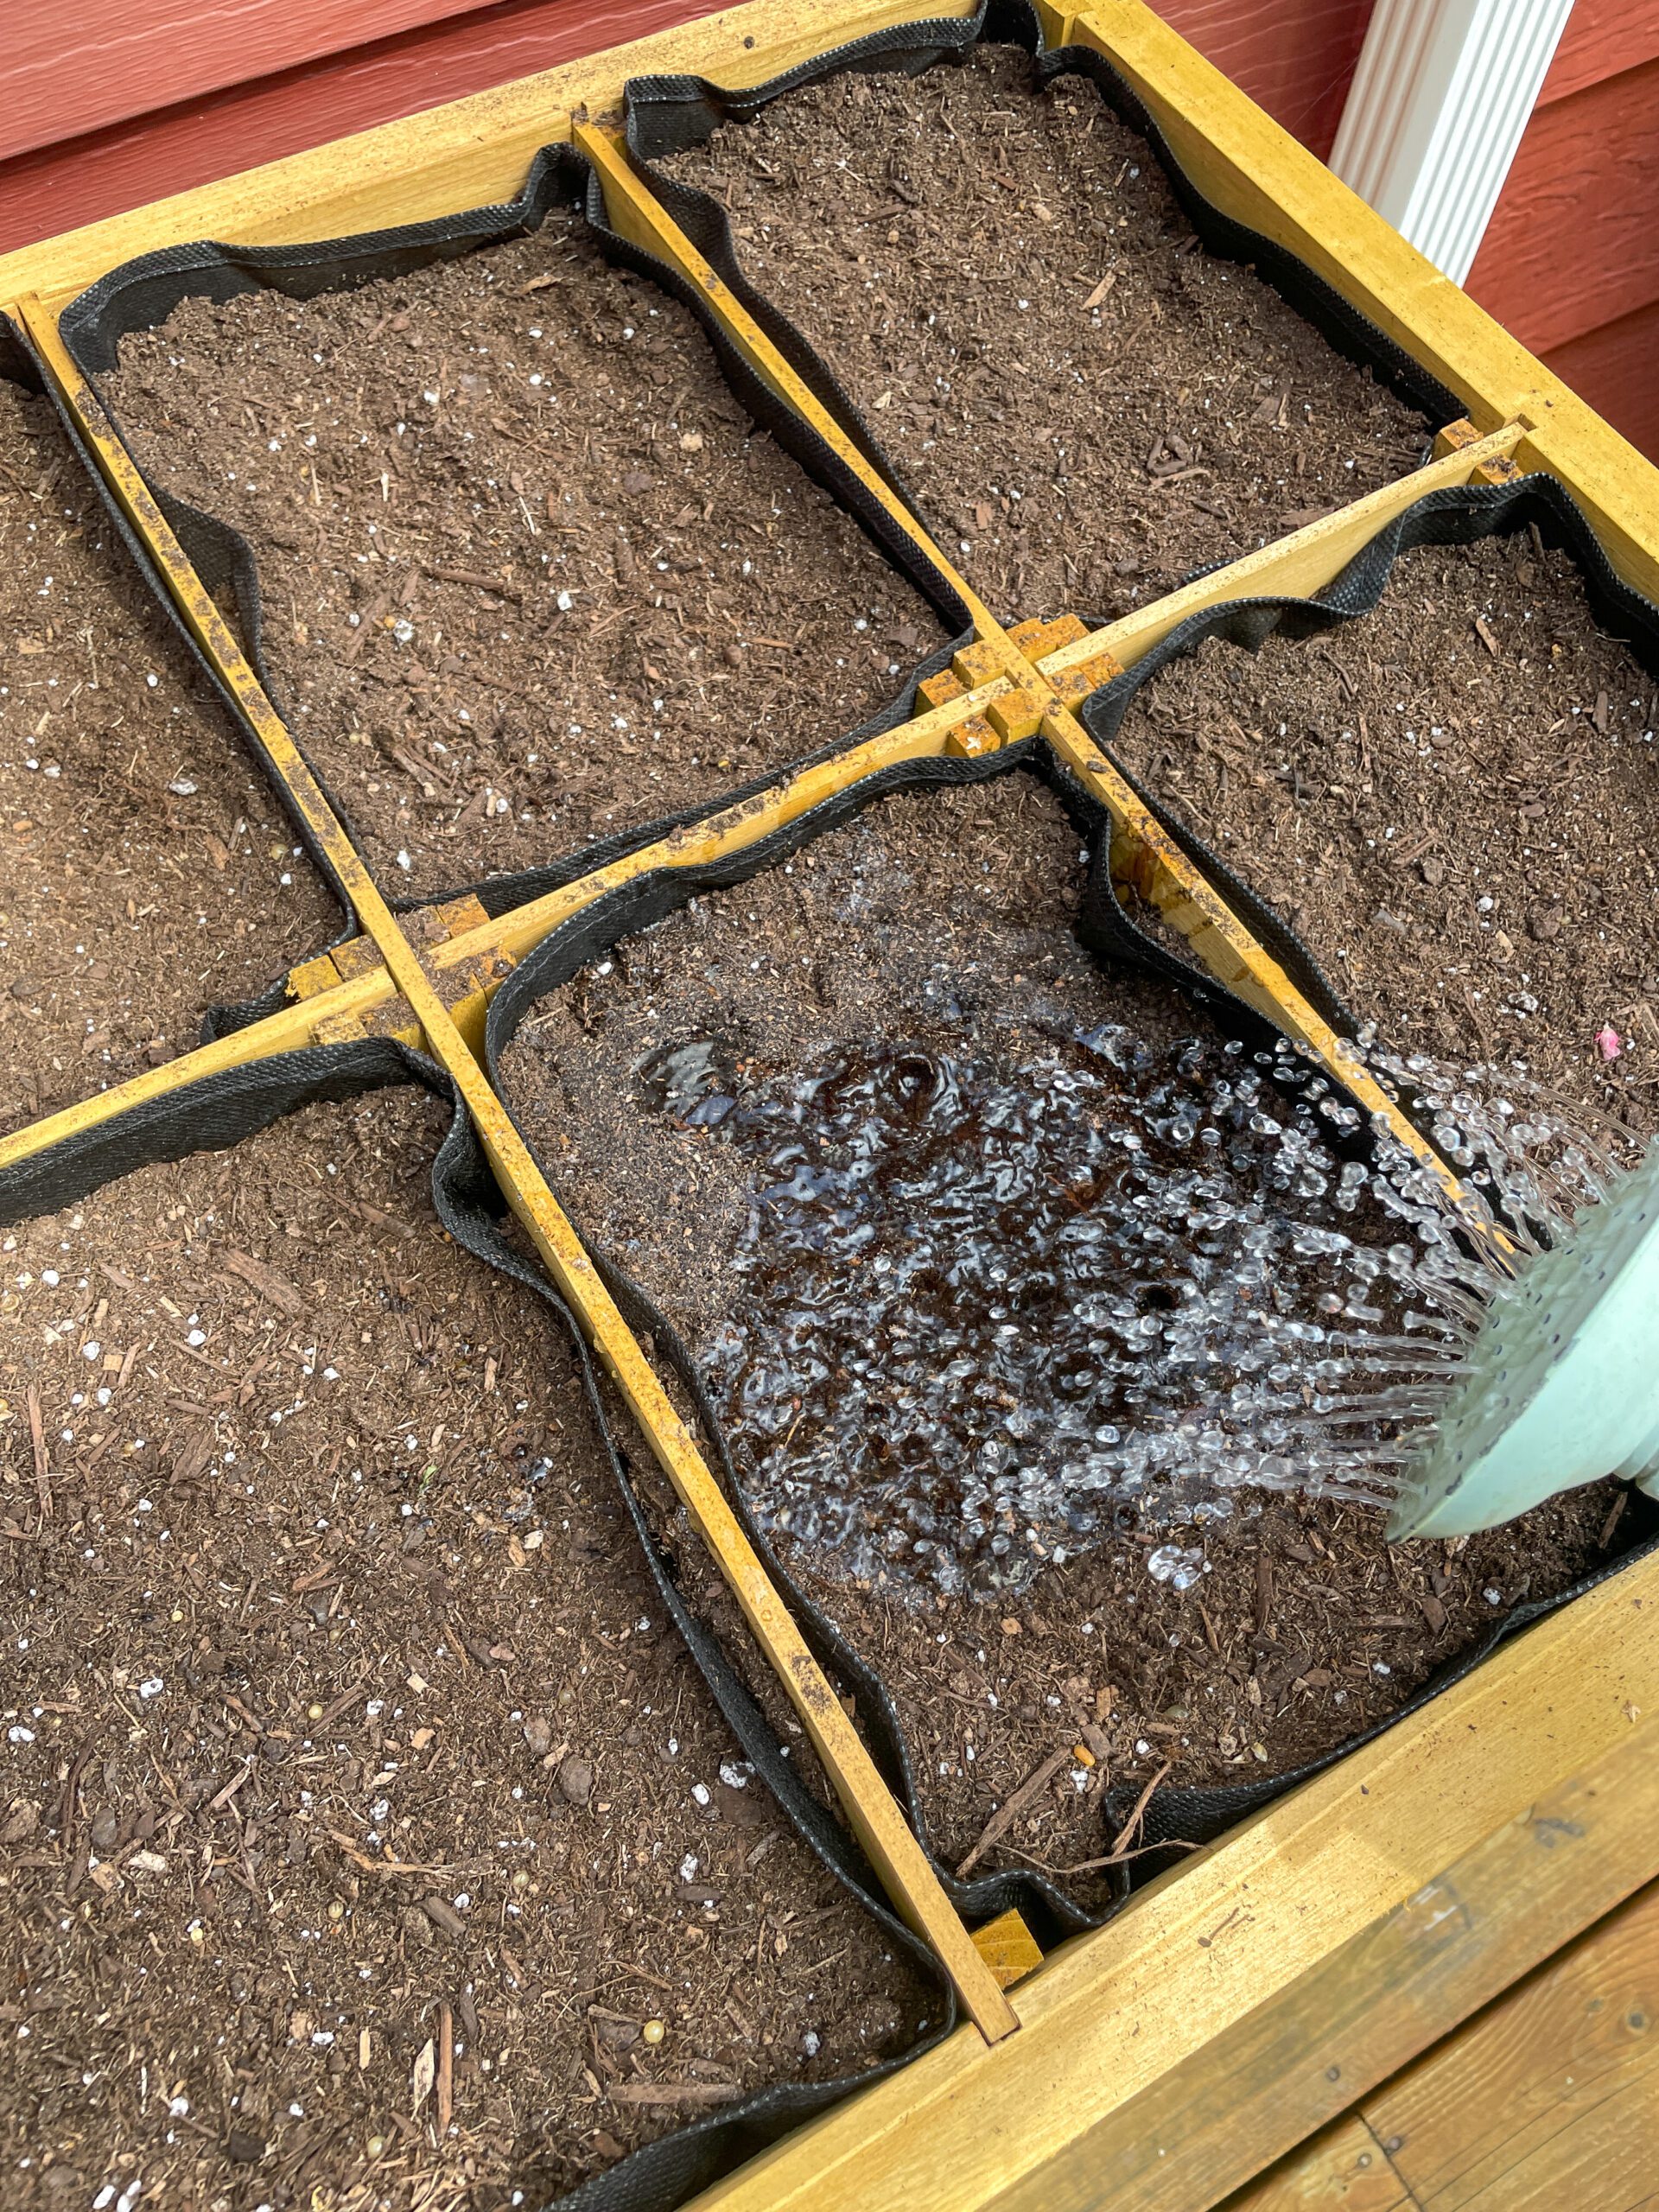 watering radish seeds after planting